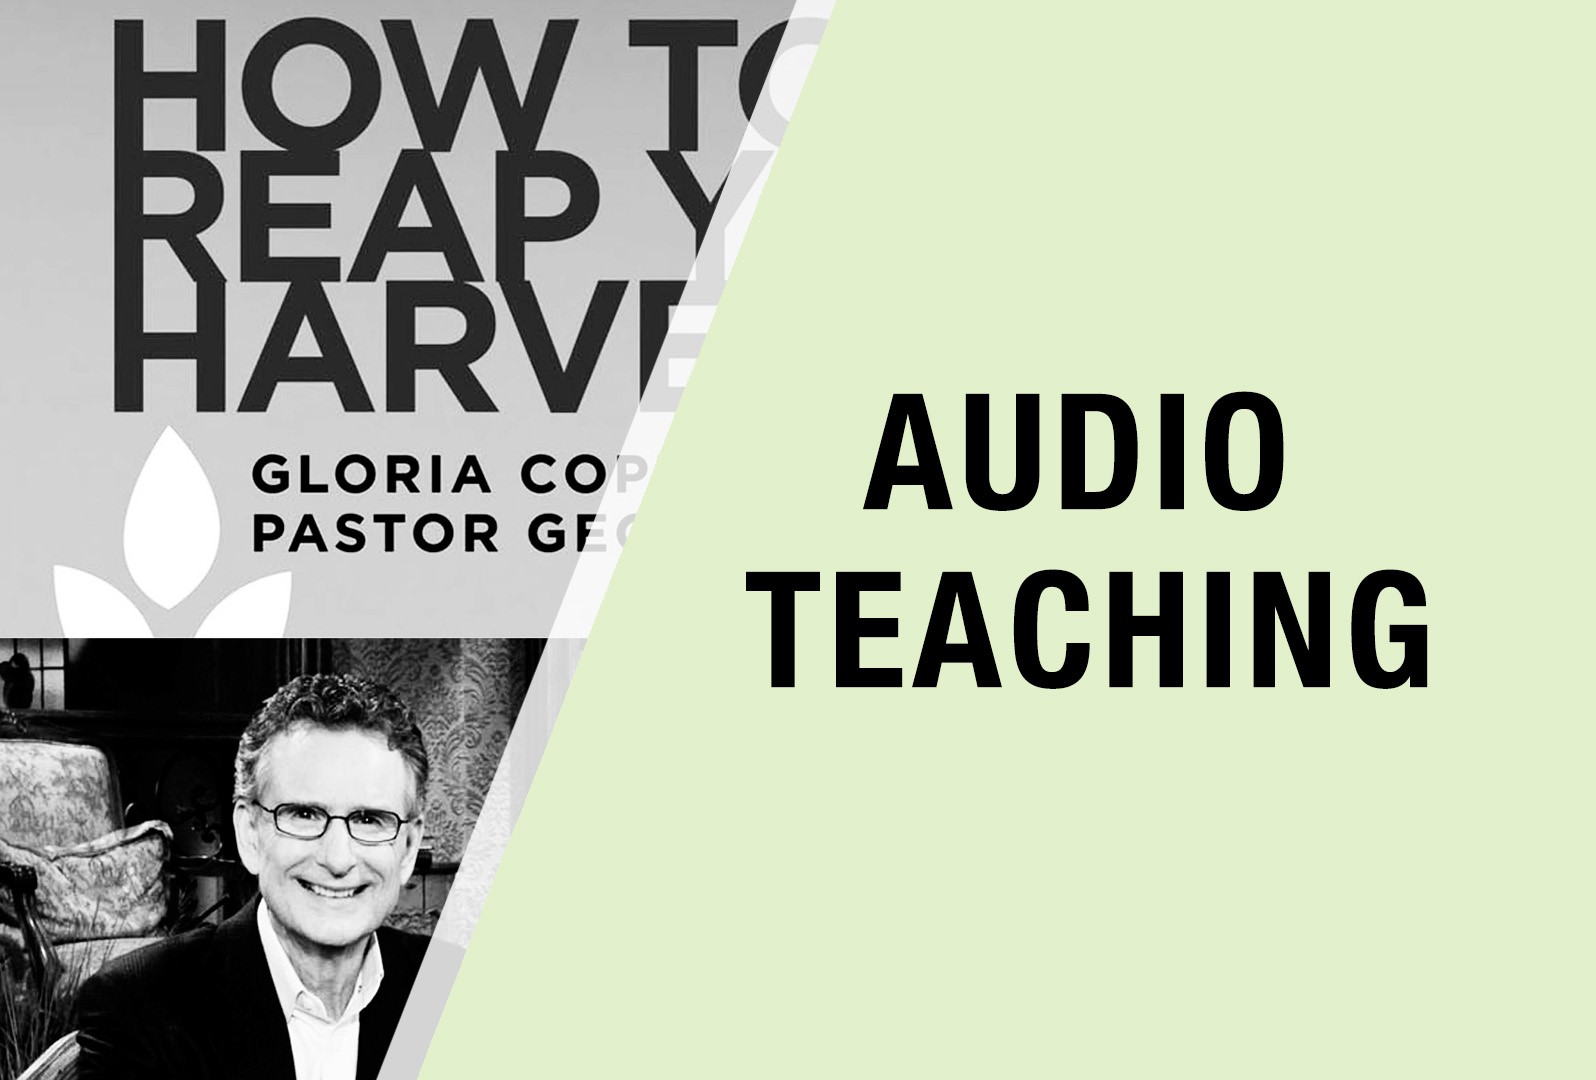 Audio Teaching from Kenneth Copeland Ministries Europe